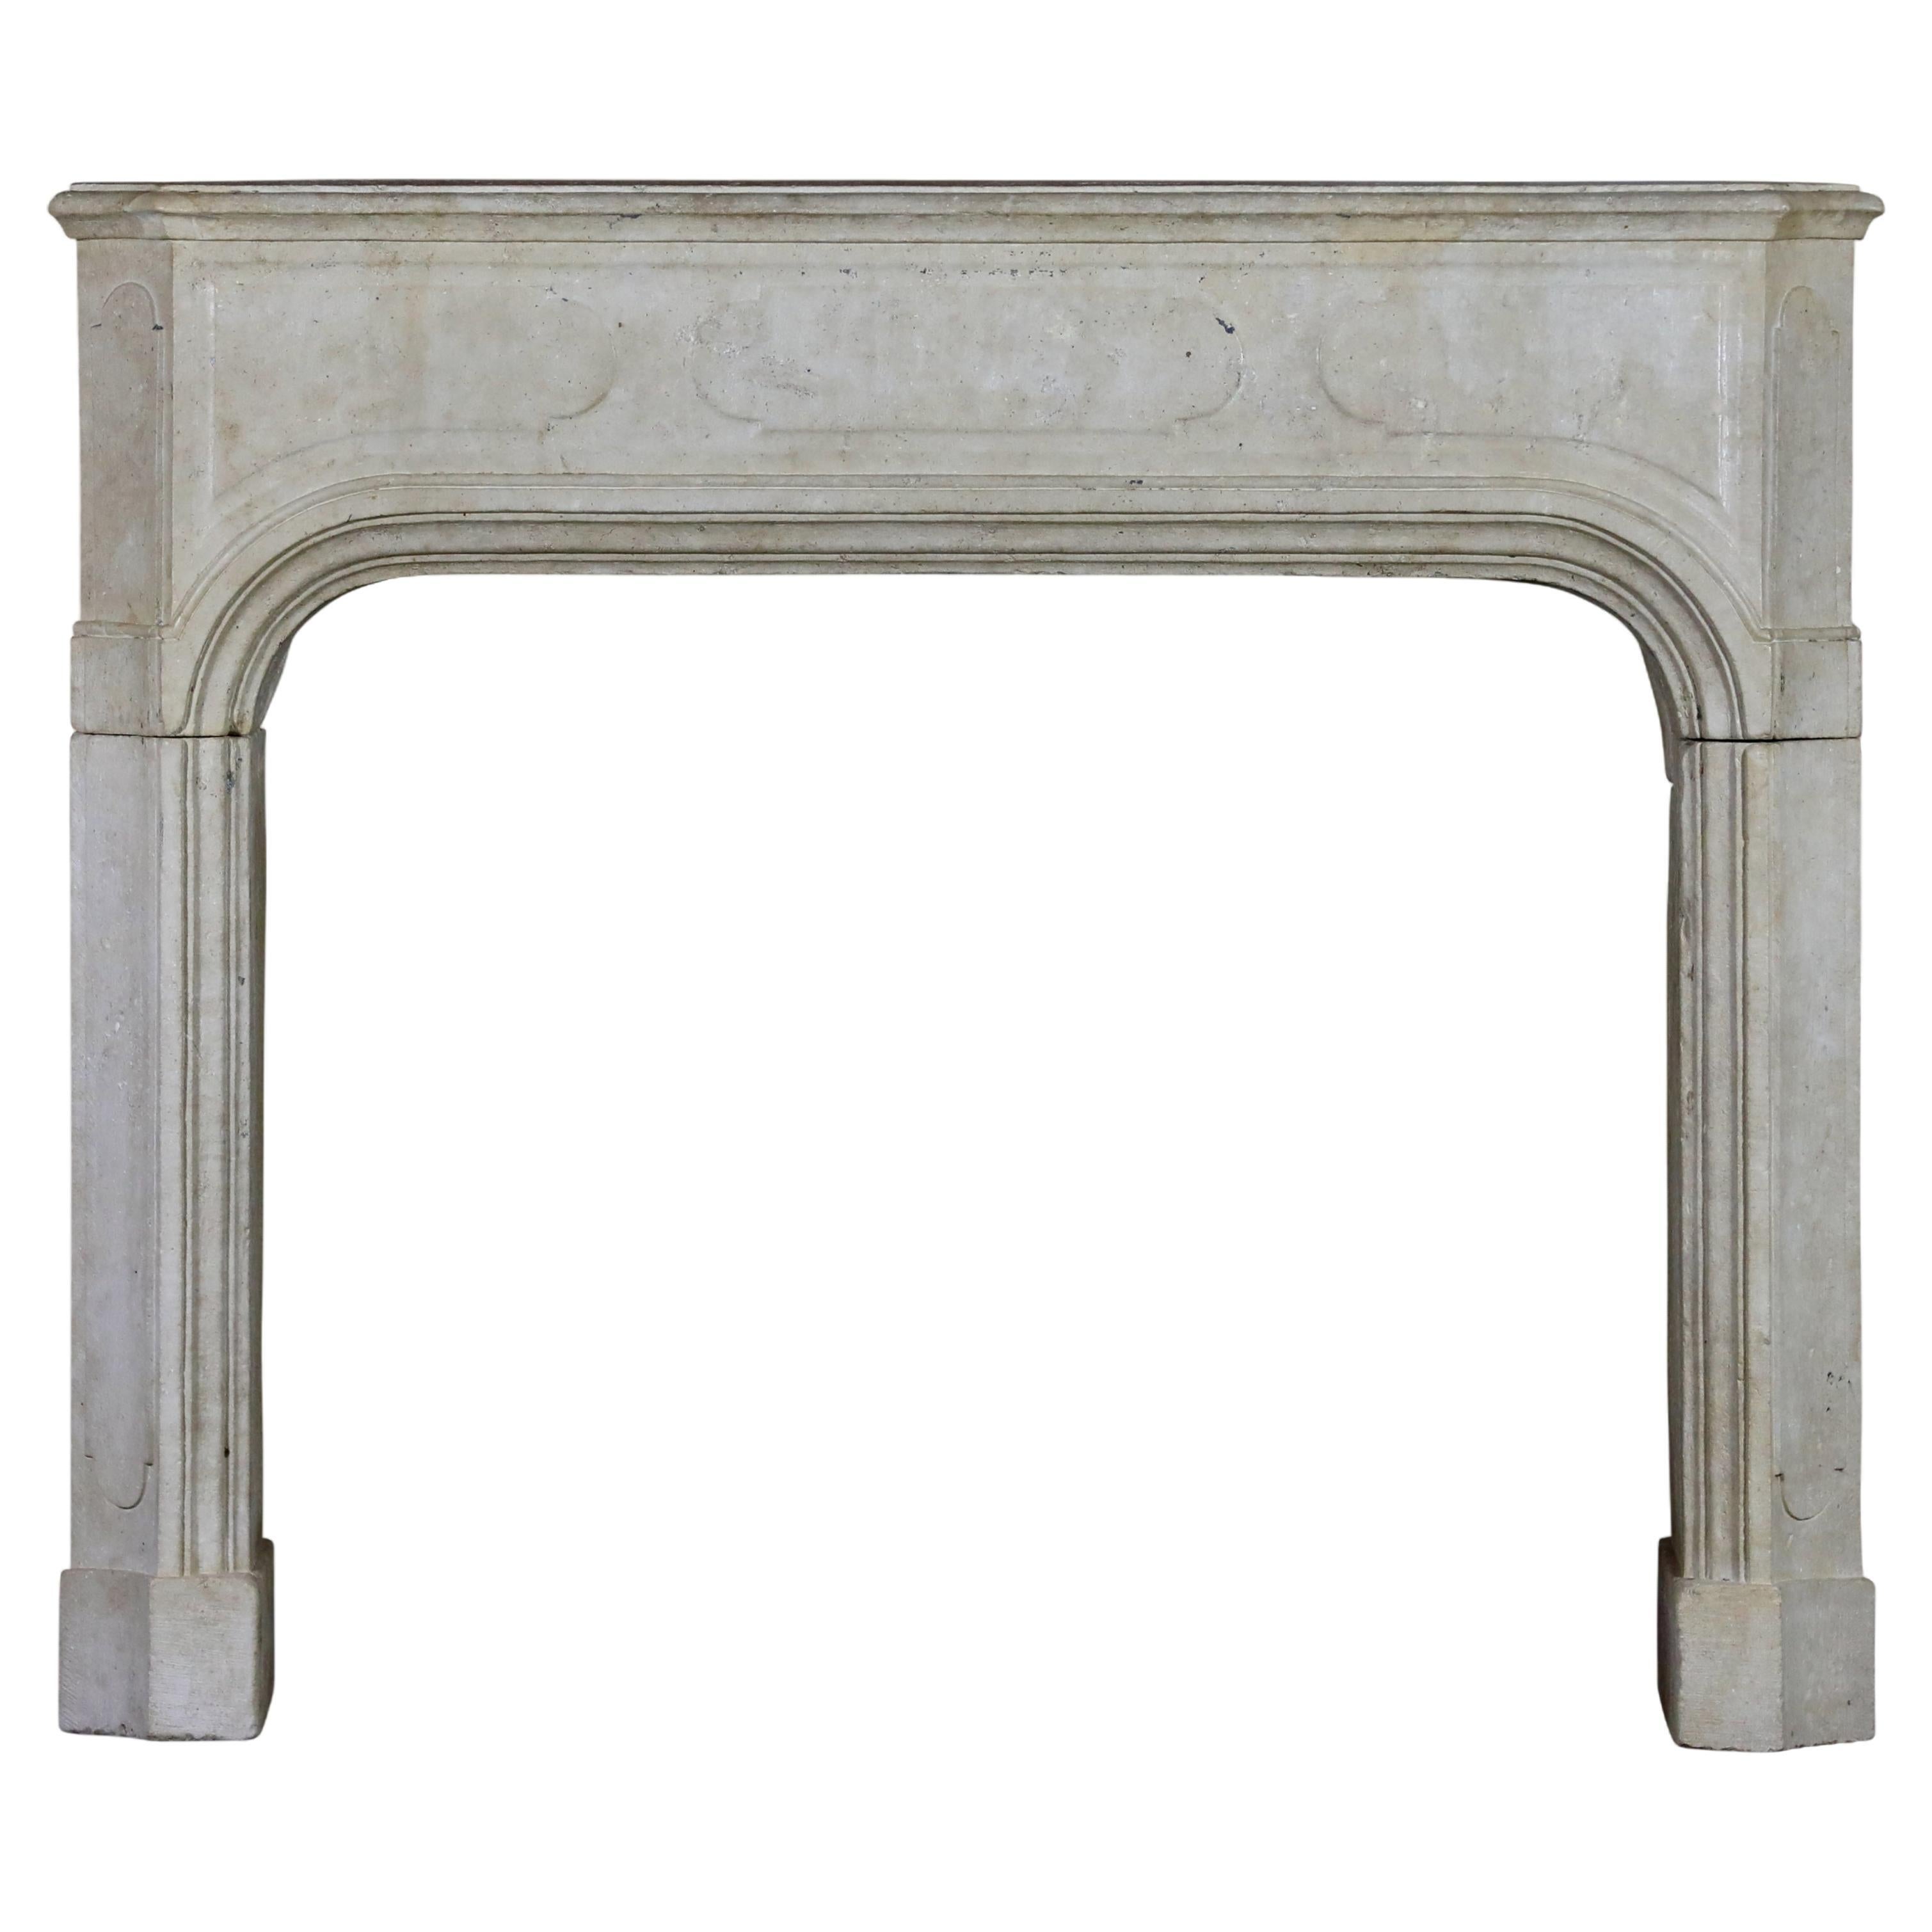 18th Century City Palace Fireplace Mantle With Original Grand Wear  For Sale